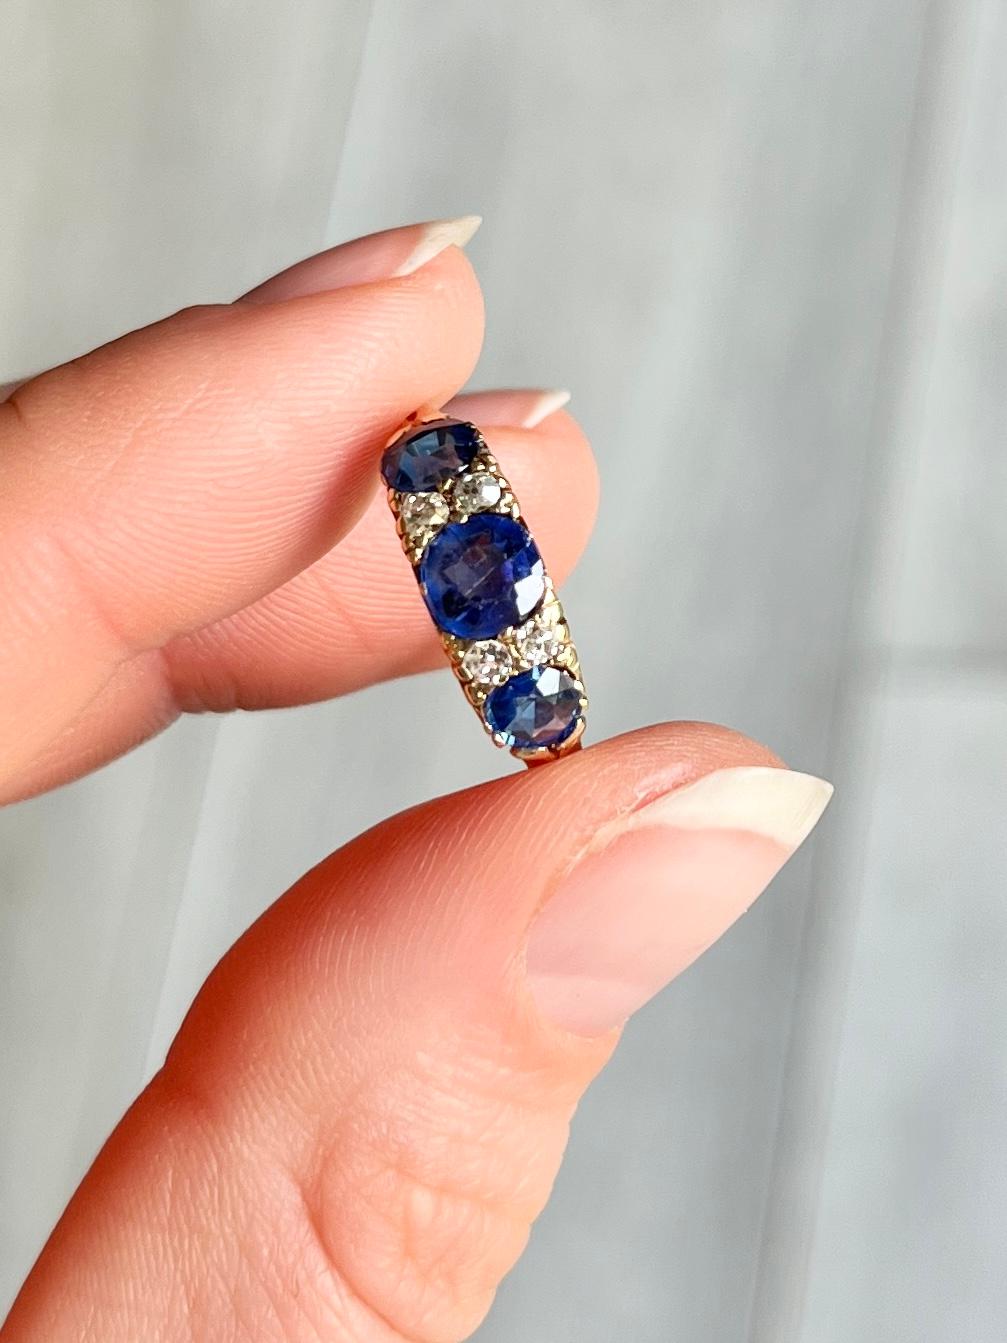 This gorgeous ring dates to the early 1900's and holds three inky blue sapphires. The central sapphire measures 60pts and the ones either side measure 30pts each. In between the blue stones are pairs of diamonds measuring 8pts per pair. The ring is